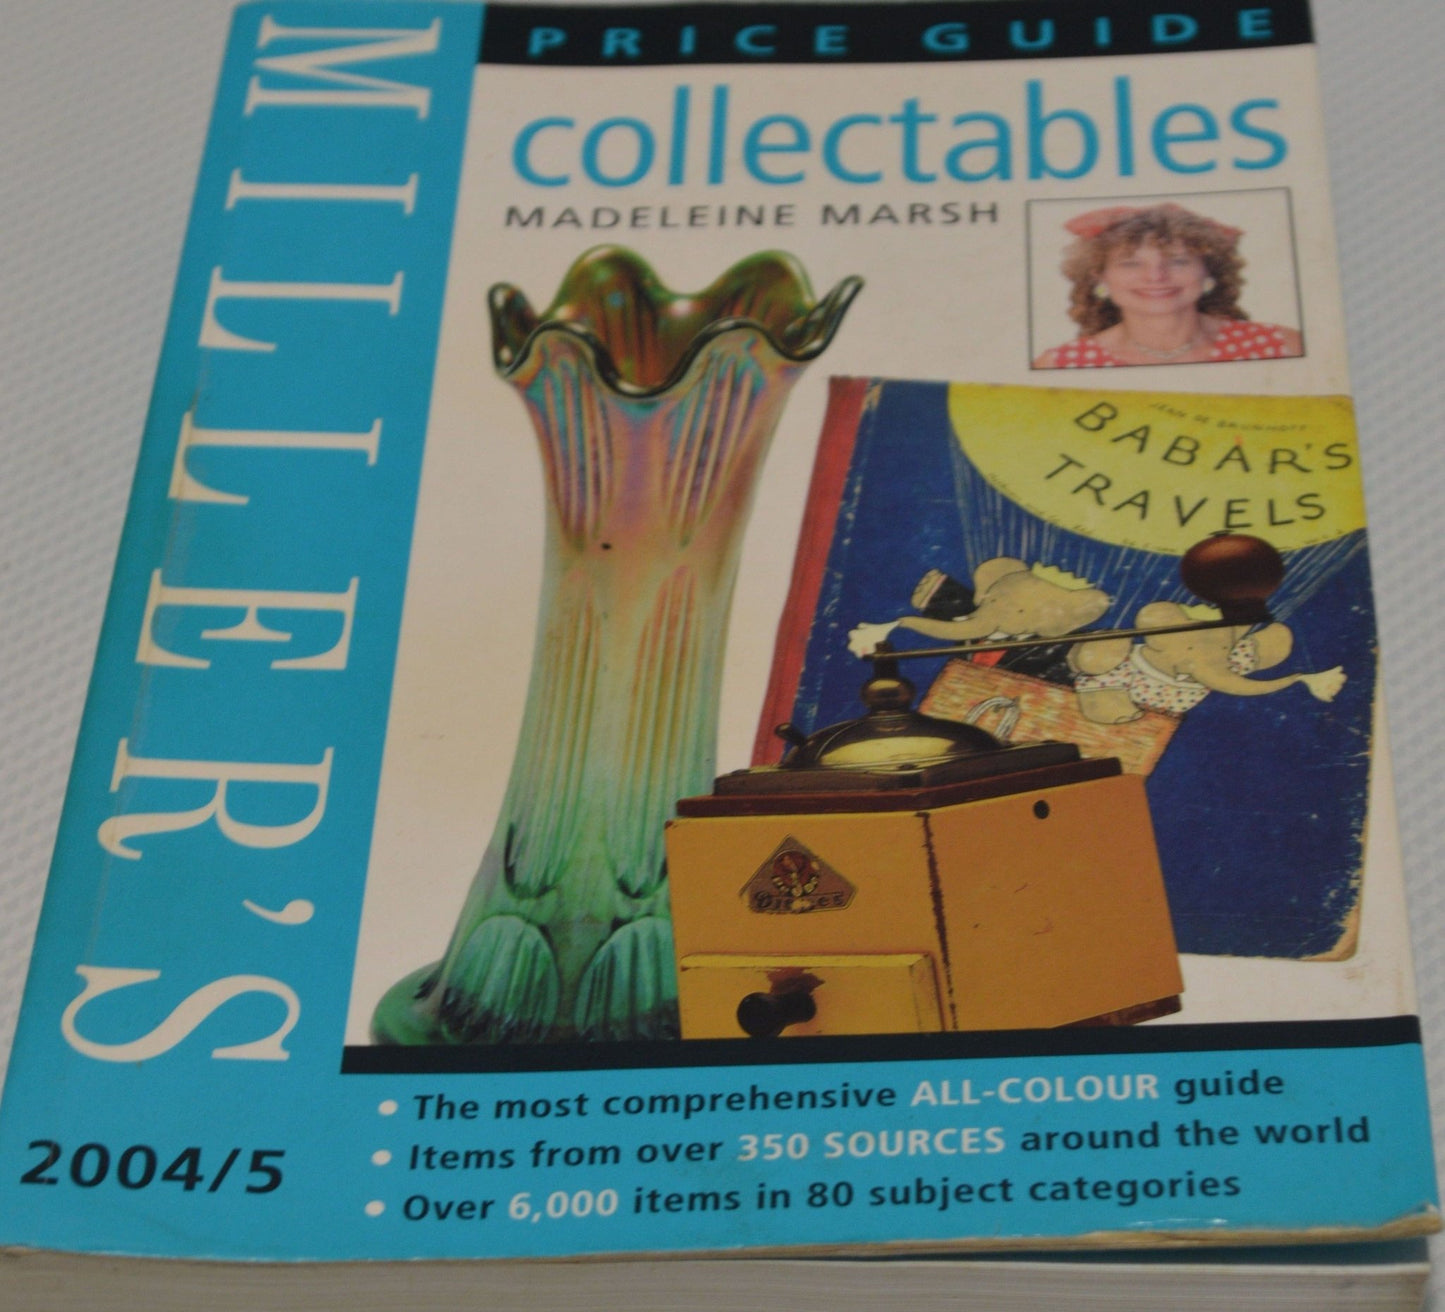 SECONDHAND BOOK MILLER’S 2004/5 COLLECTABLES(PREVIOUSLY OWNED) GOOD CONDITION - TMD167207